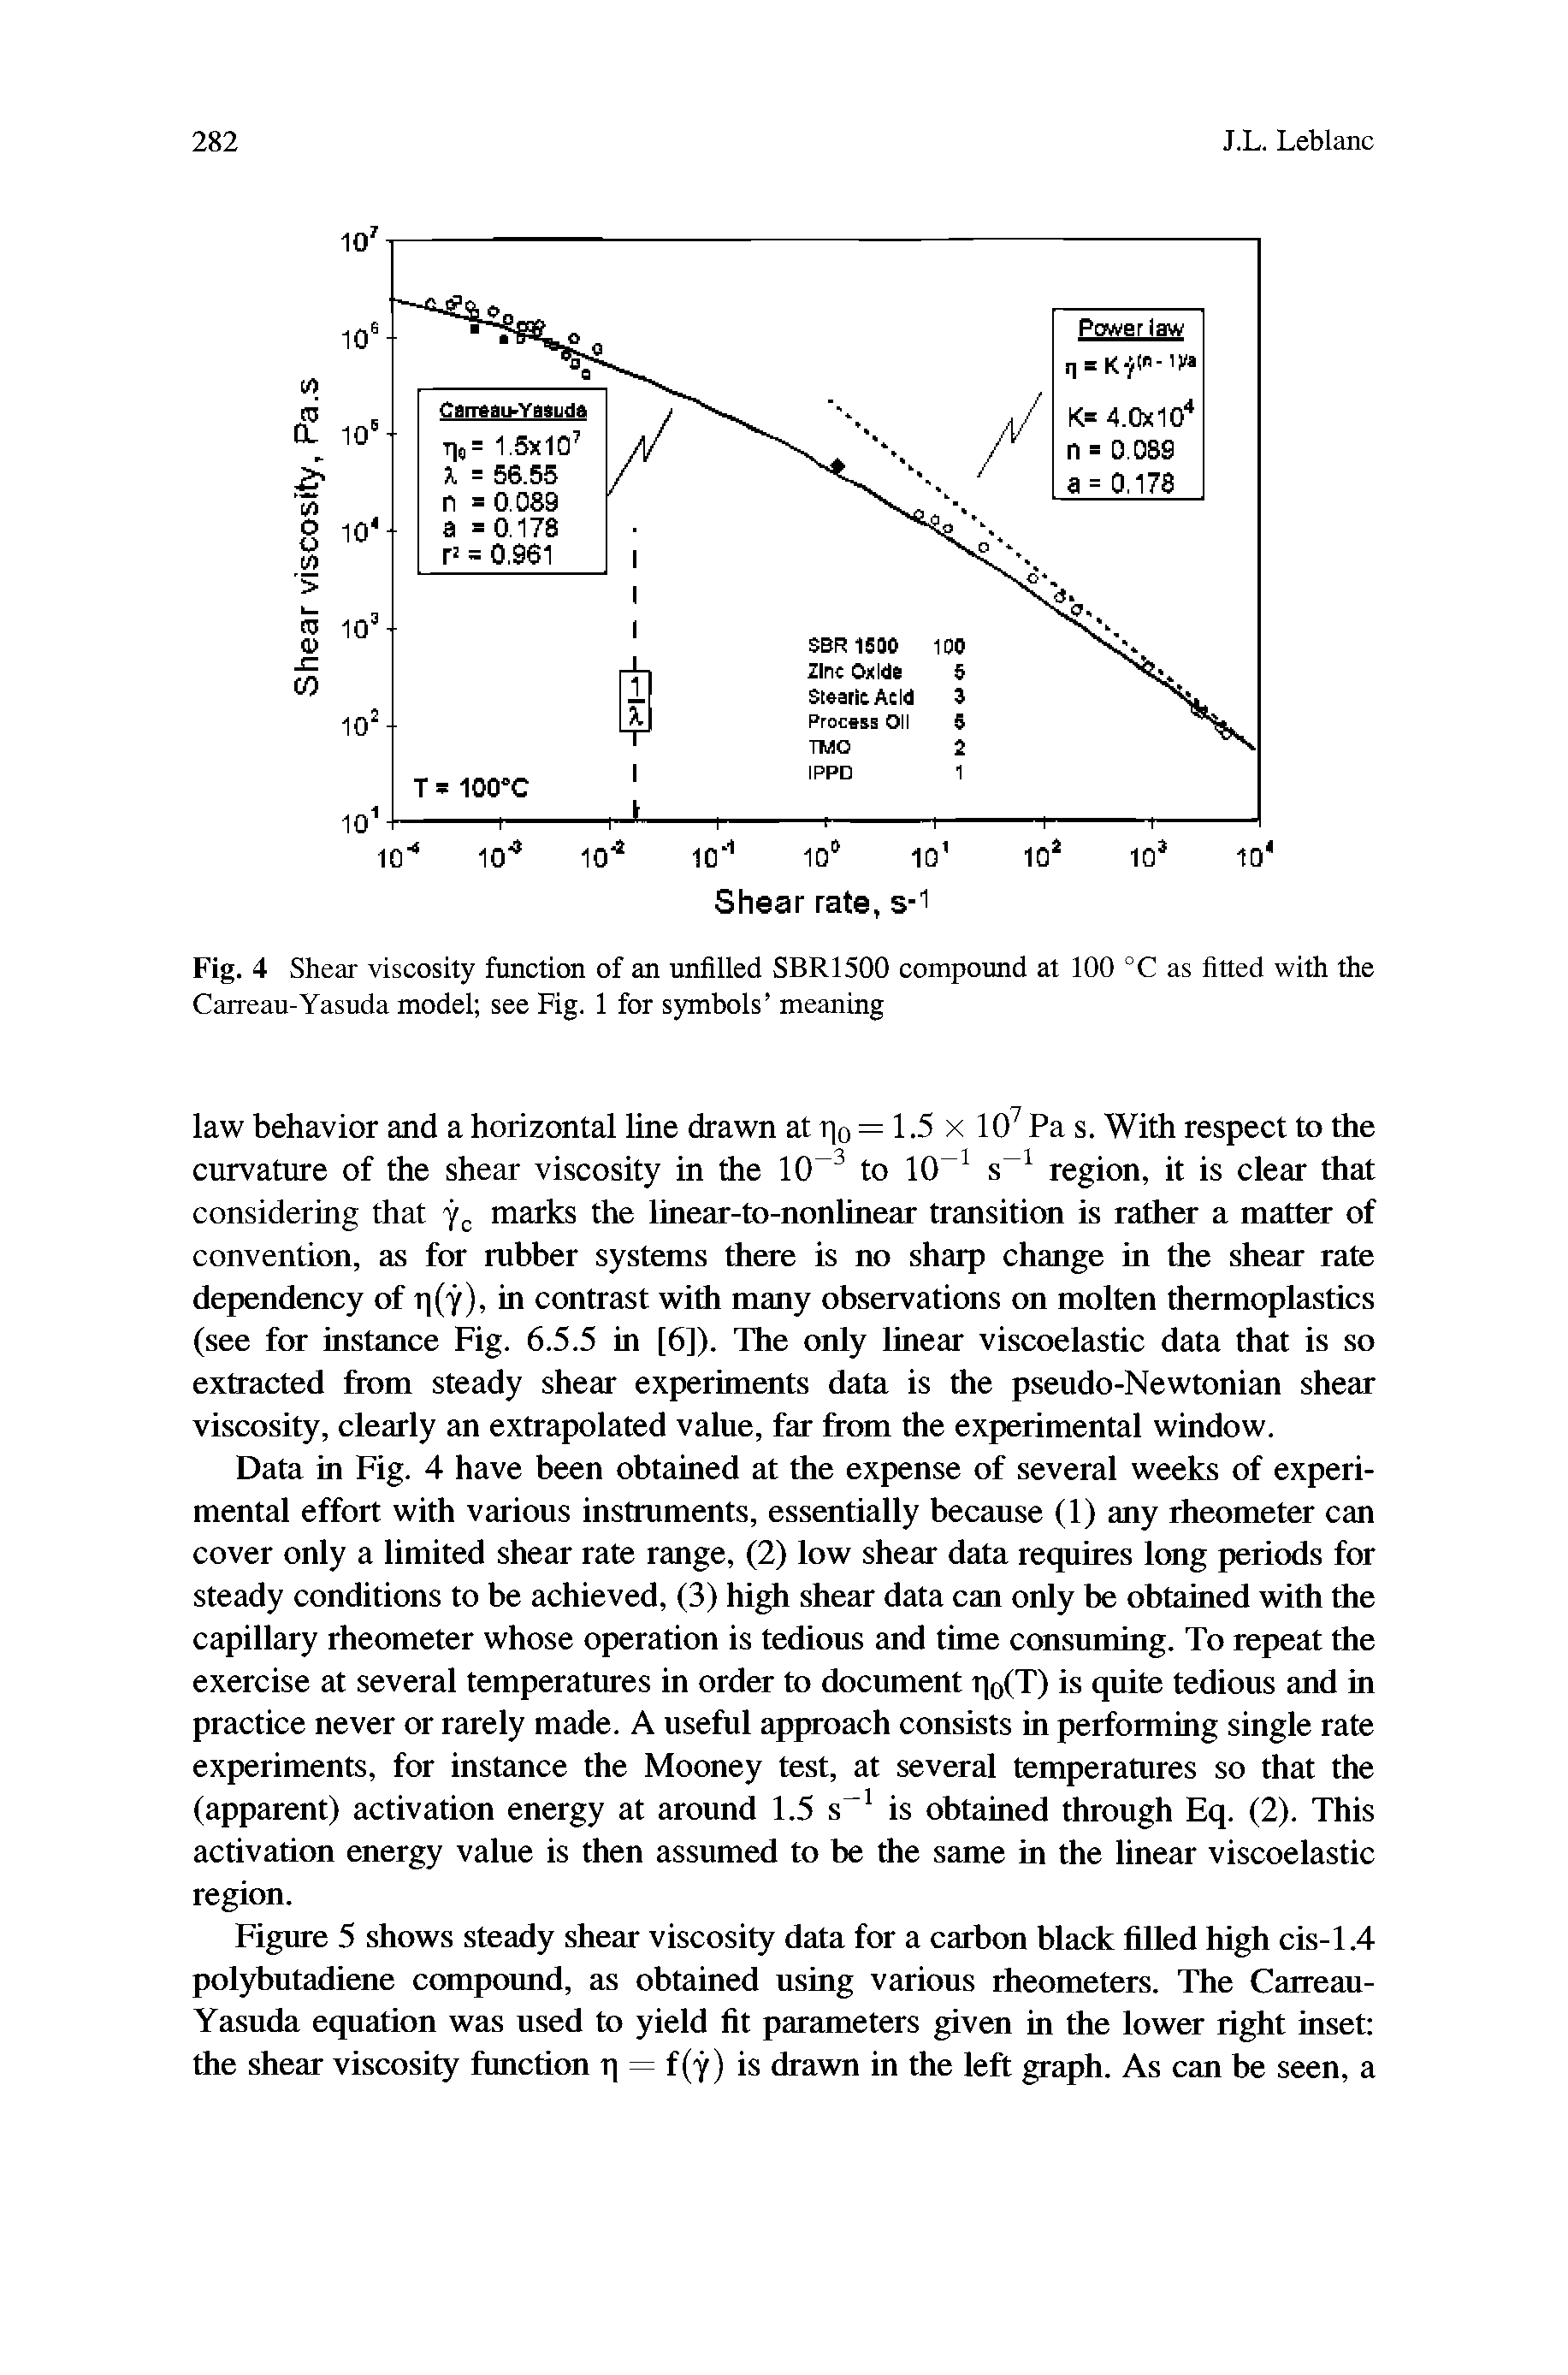 Fig. 4 Shear viscosity function of an unfilled SBR1500 compound at 100 °C as fitted with the Carreau-Yasuda model see Fig. 1 for symbols meaning...